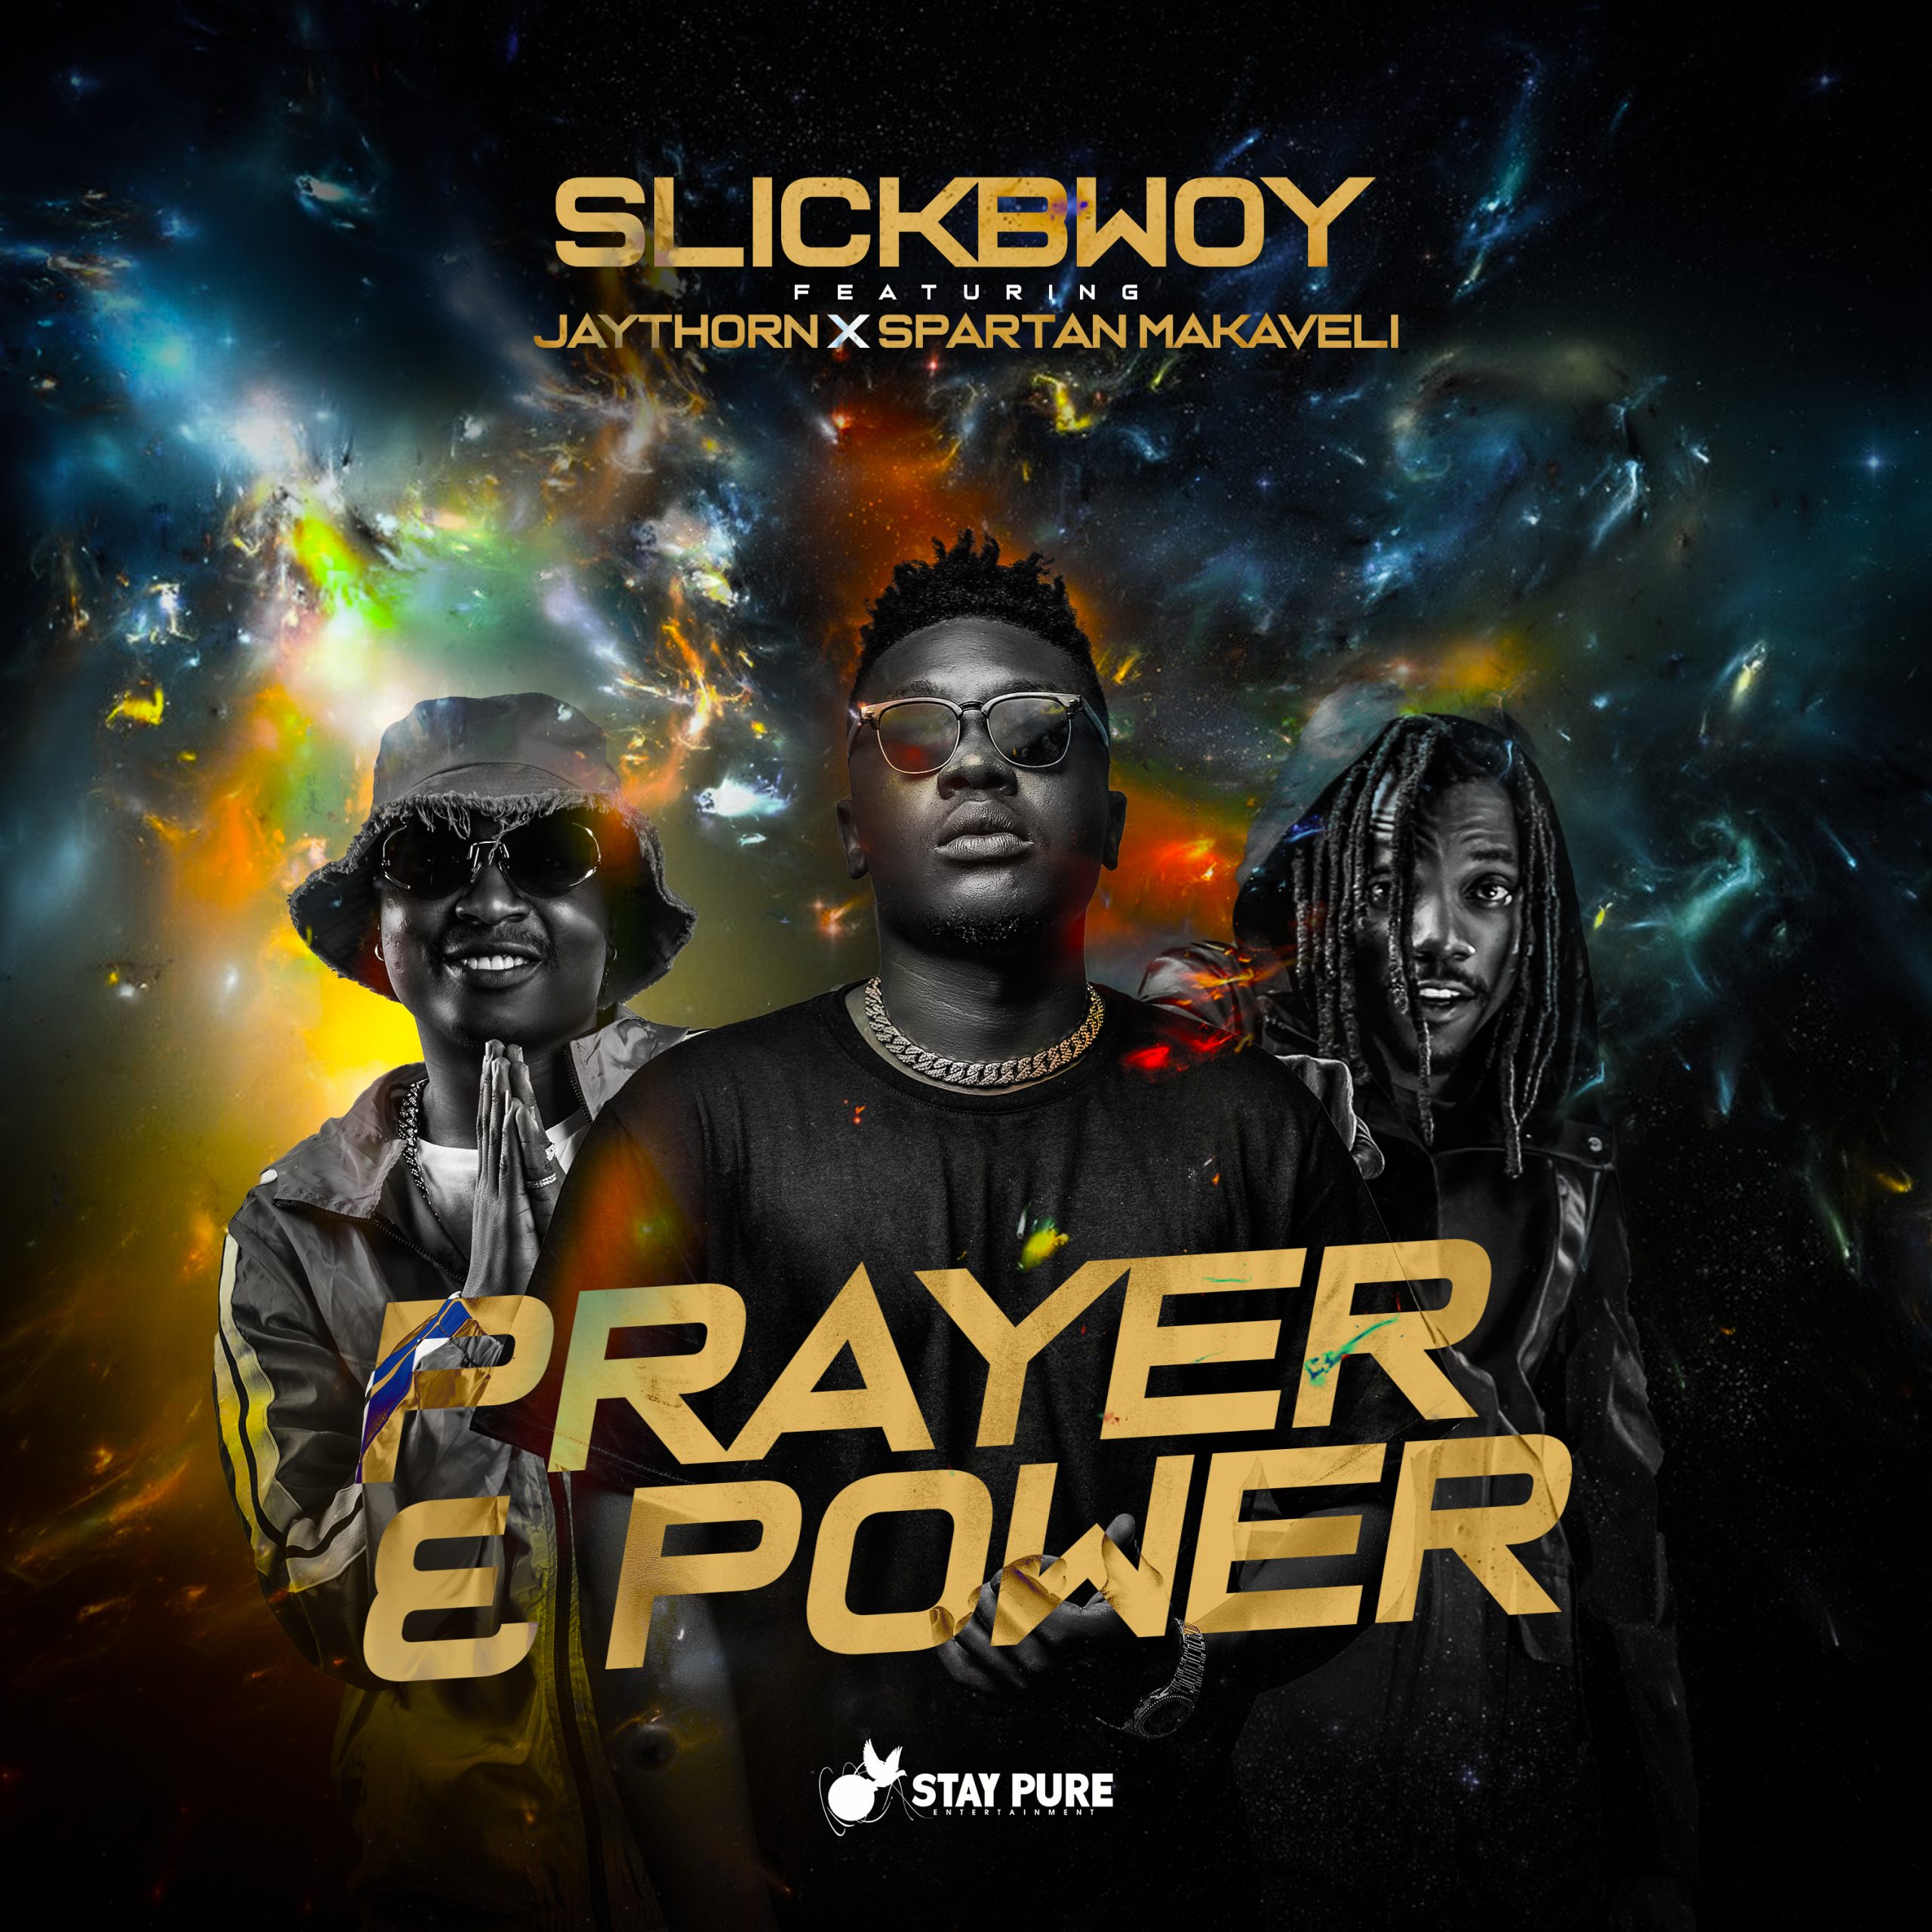 Slick Bowy ft. Jay Thorn, Spartan Makaveli - "Prayer And Power" Mp3